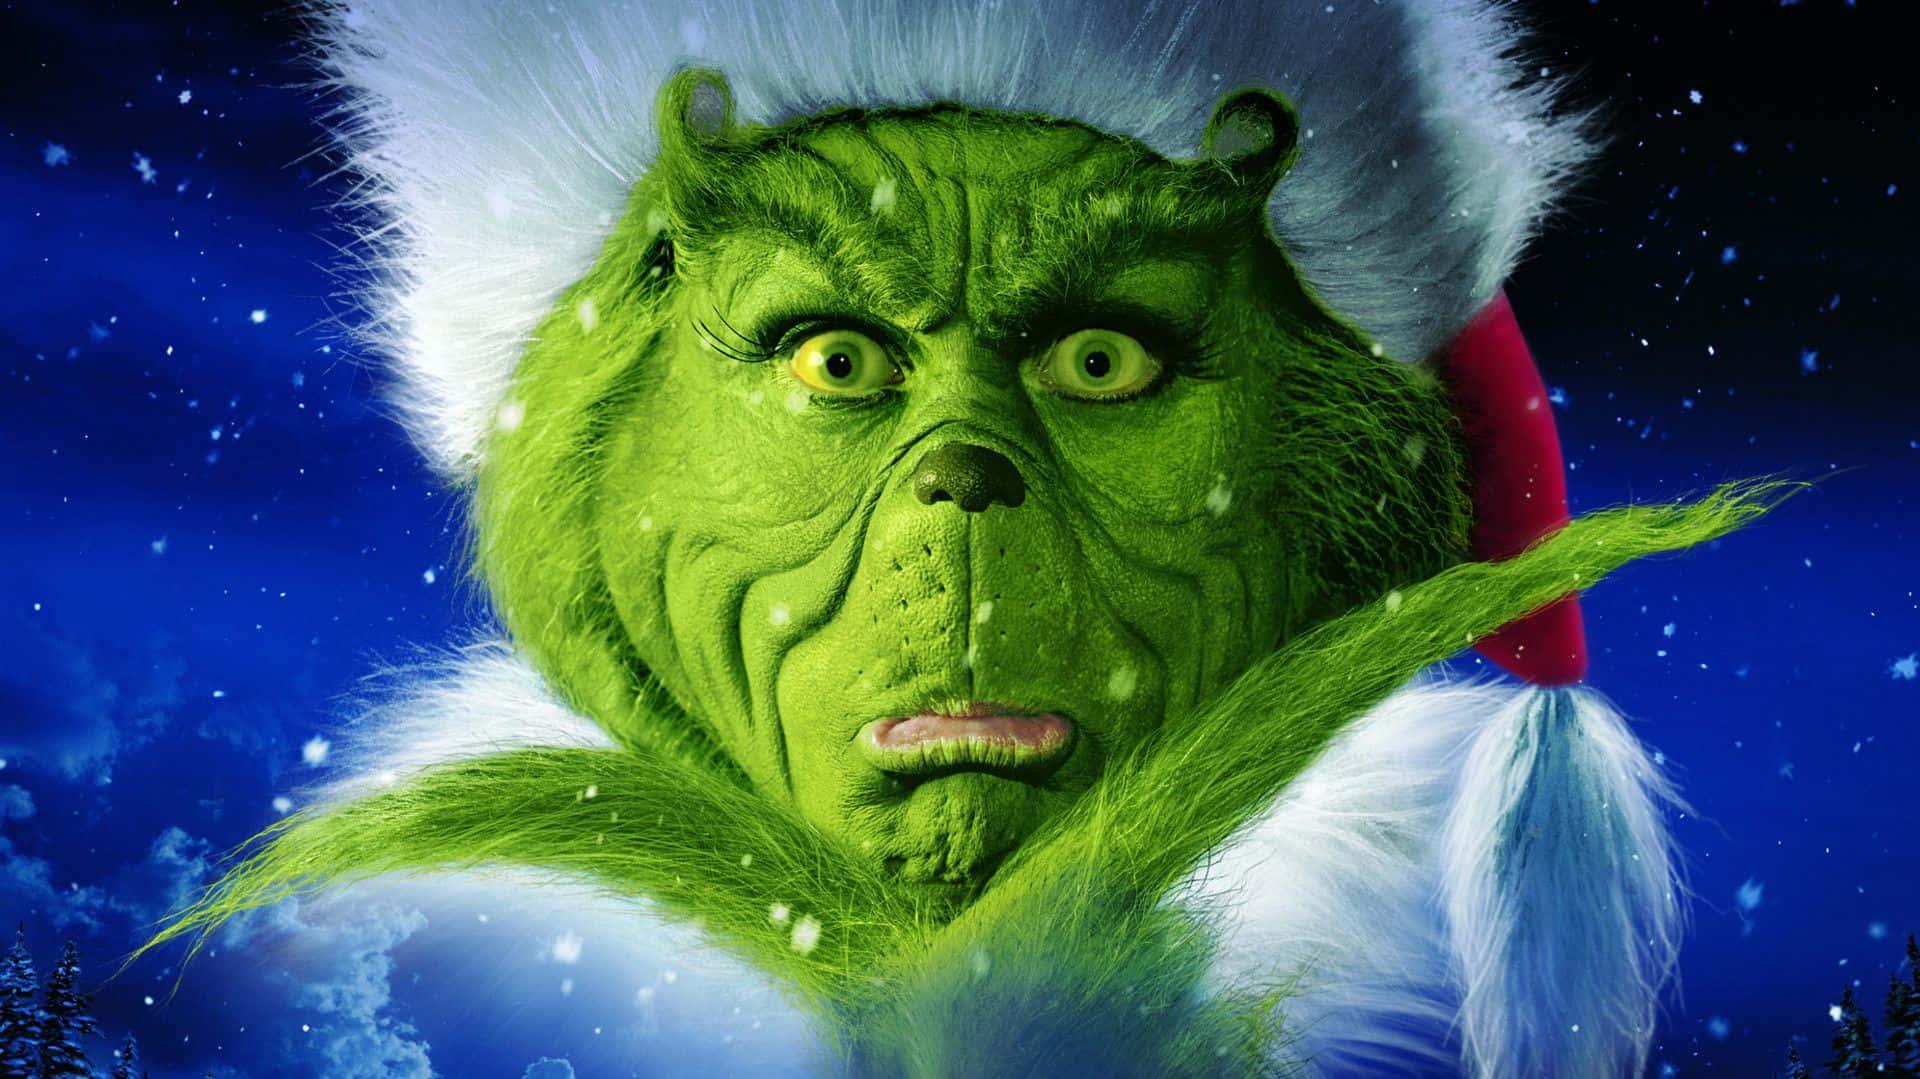 Get Into The Christmas Spirit With Grinch Wallpaper